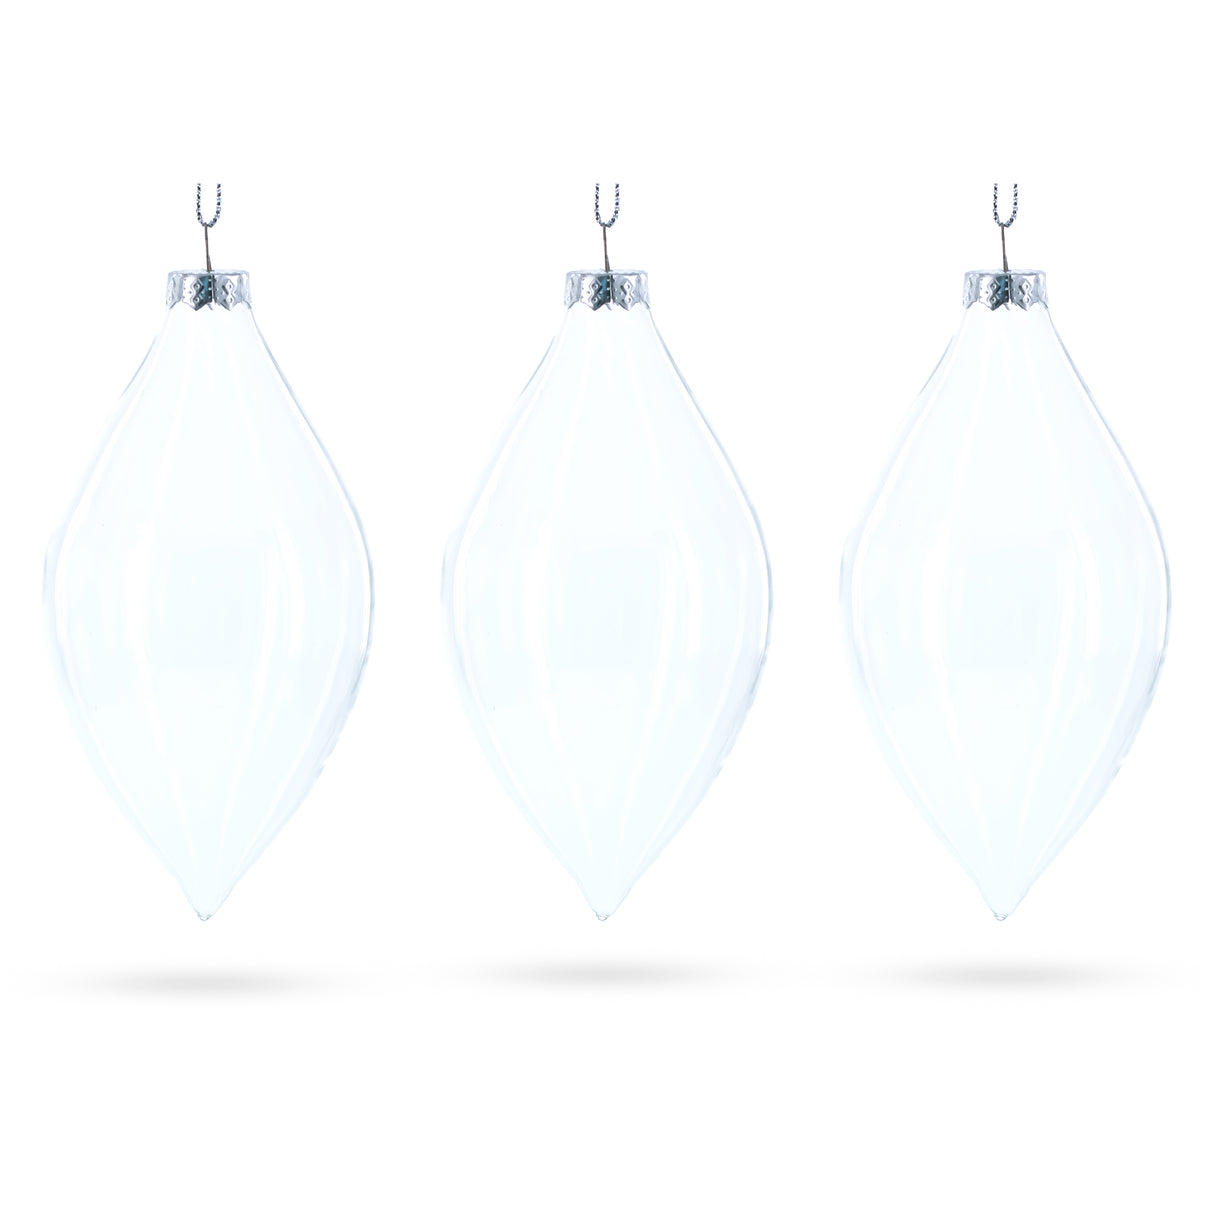 Glass Set of 3 Oval - Icicle Clear Blown Glass Christmas Ornament 5.4 Inches (137 mm) in Clear color Oval